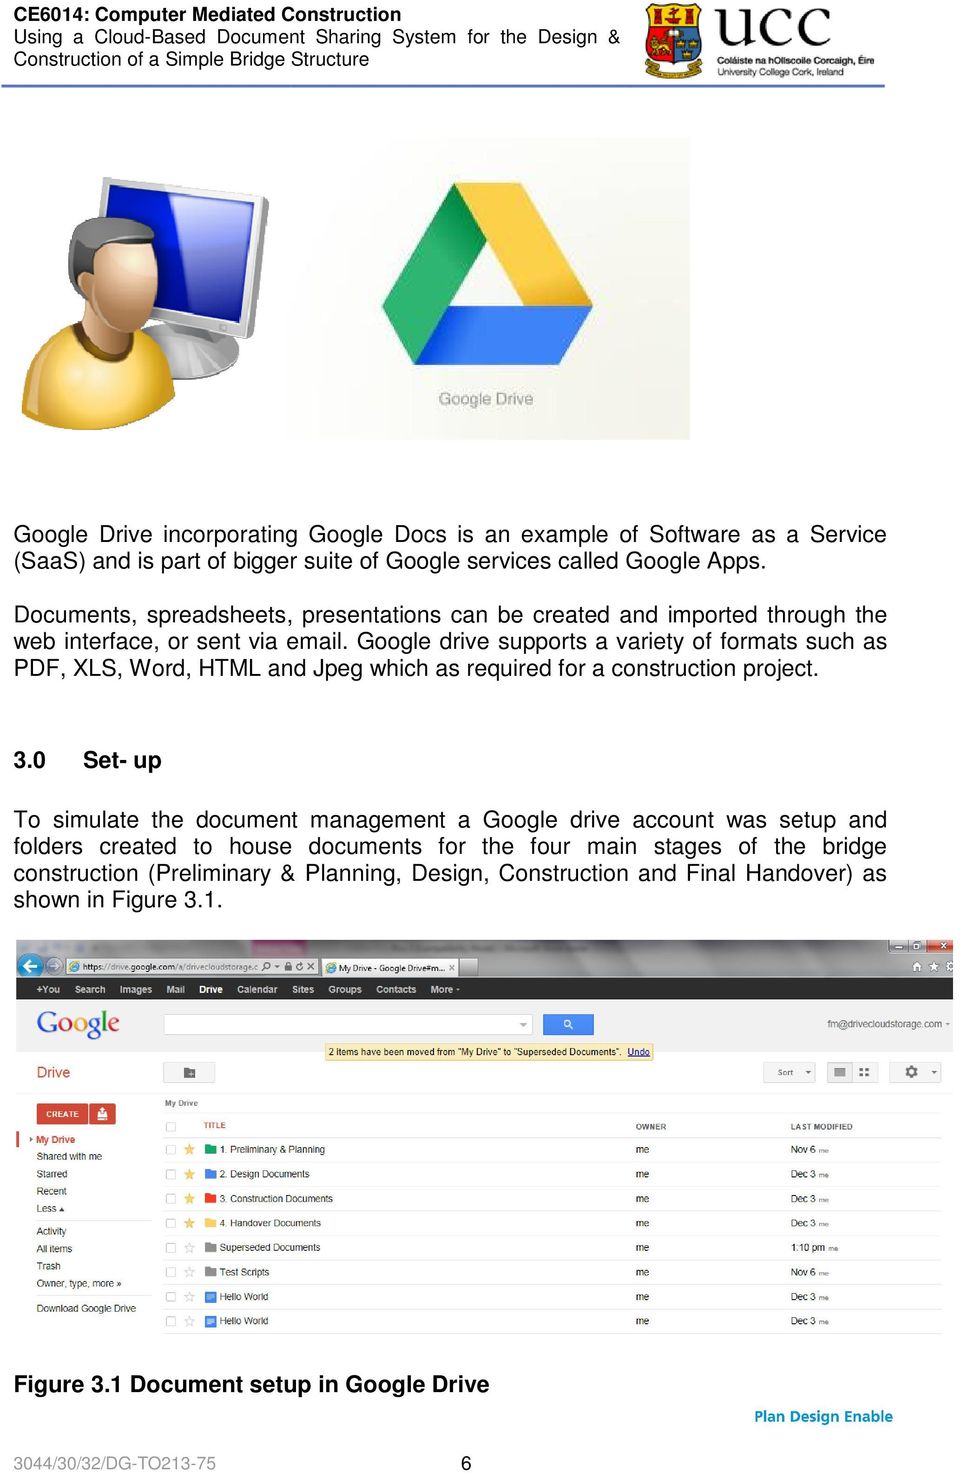 Google drive supports a variety of formats such as PDF, XLS, Word, HTML and Jpeg which as required for a construction project. 3.